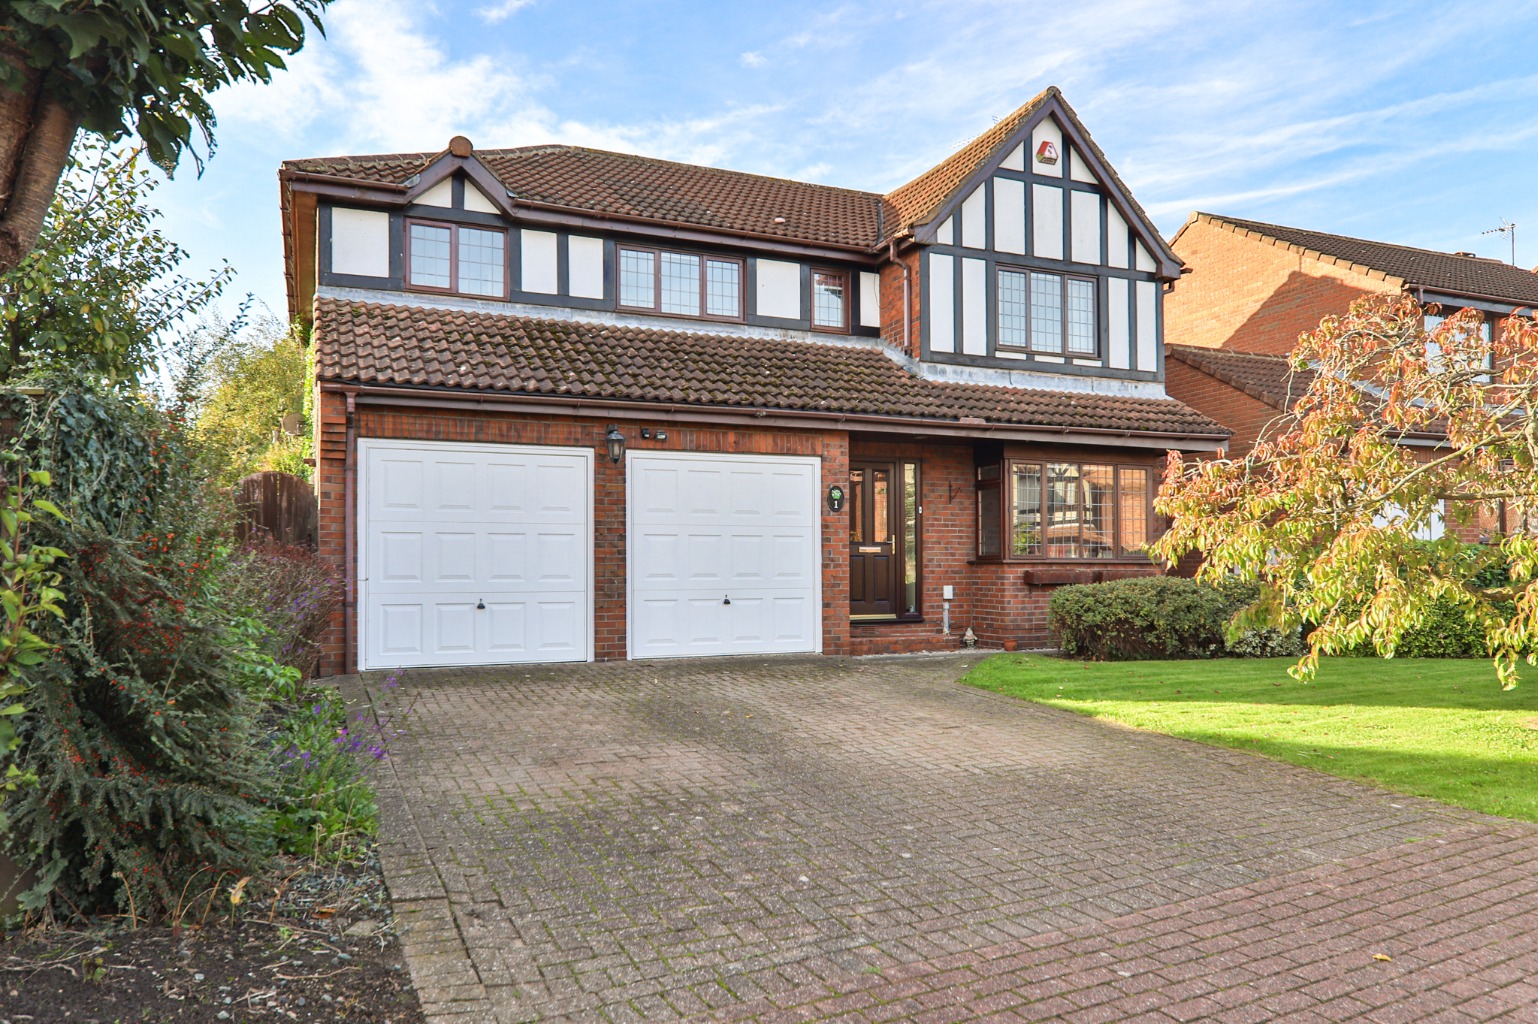 5 bed detached house for sale in Wentworth Close, Beverley - Property Image 1